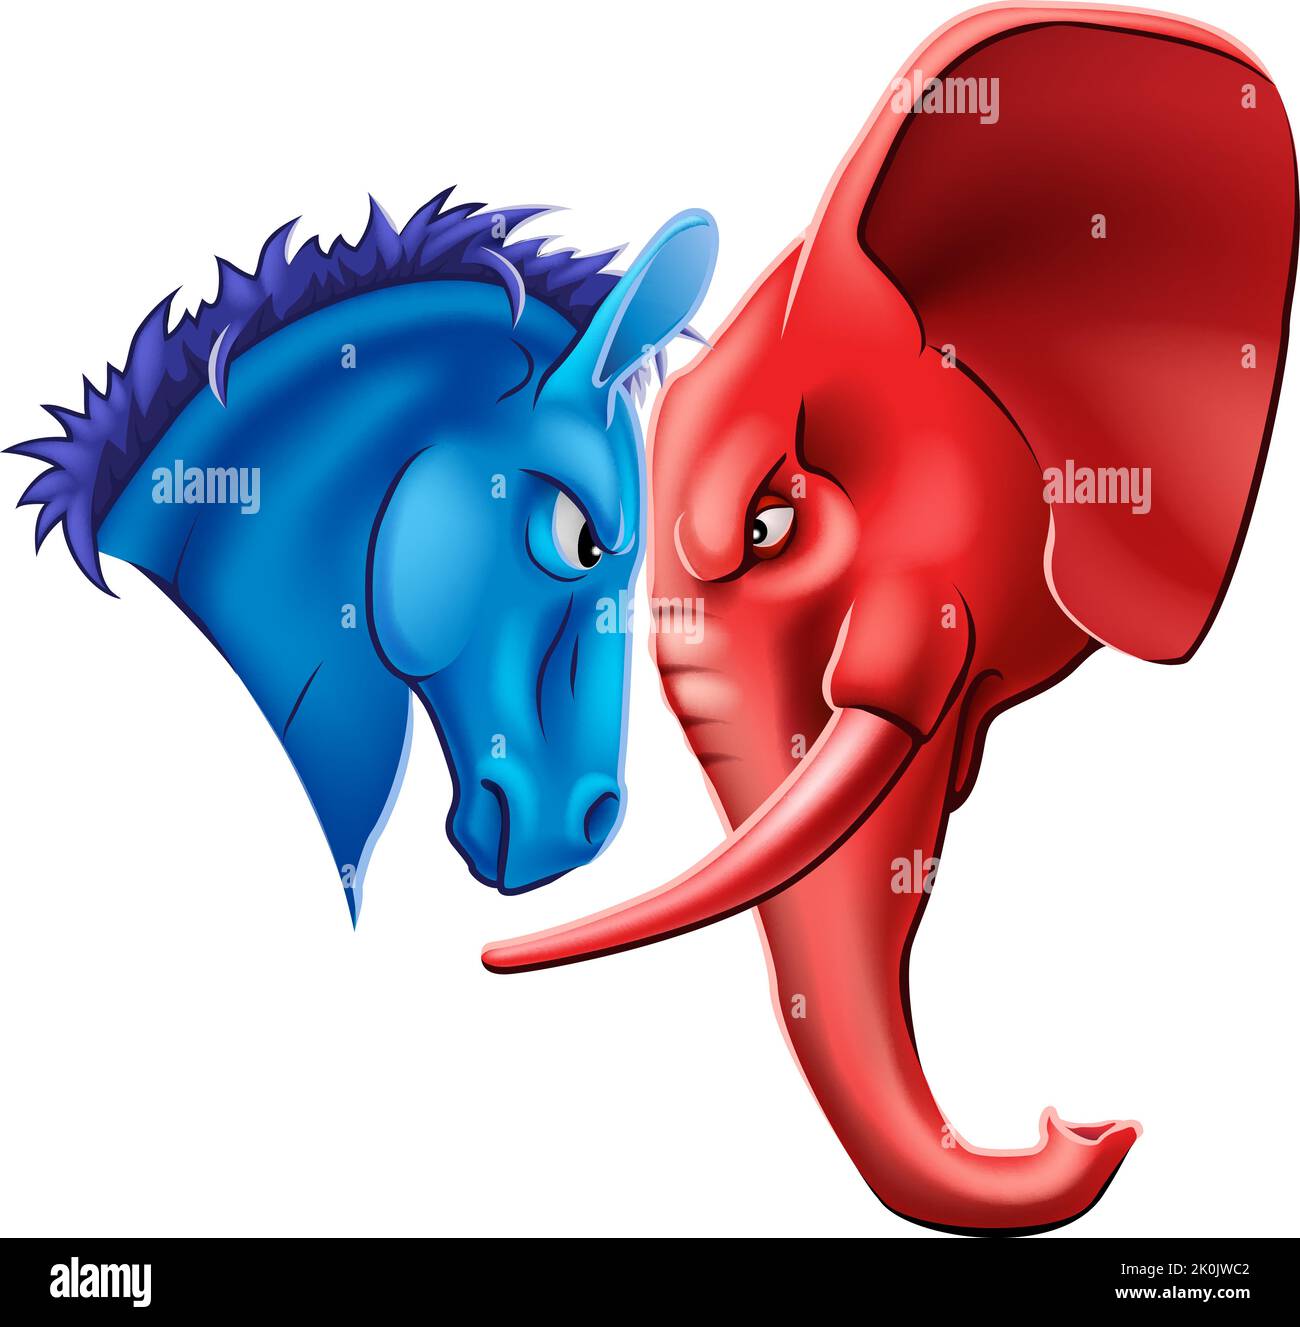 Elephant And Donkey Politics Election Face Off Stock Vector